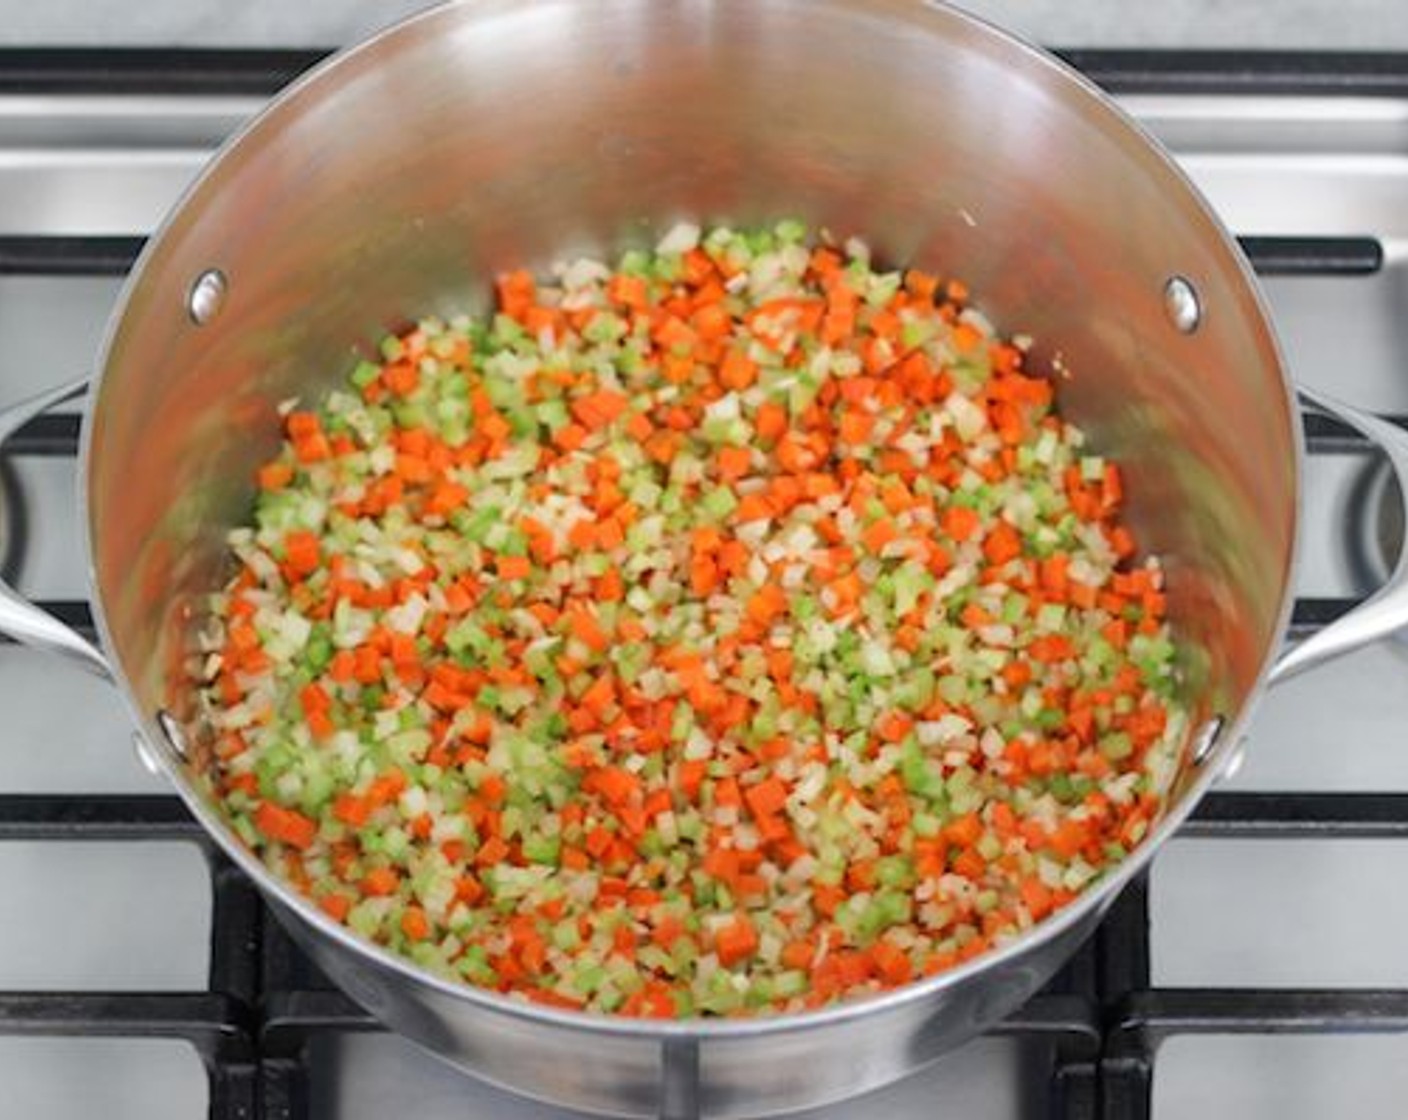 step 1 In a dutch oven or a large pot, heat the Butter (1 Tbsp) or oil until hot, adding the Onion (1), Carrots (2), Celery (2 stalks), and Garlic (2 cloves). Season with salt and ground black pepper. Cook for about 5 minutes on medium heat, until the vegetables are softened.